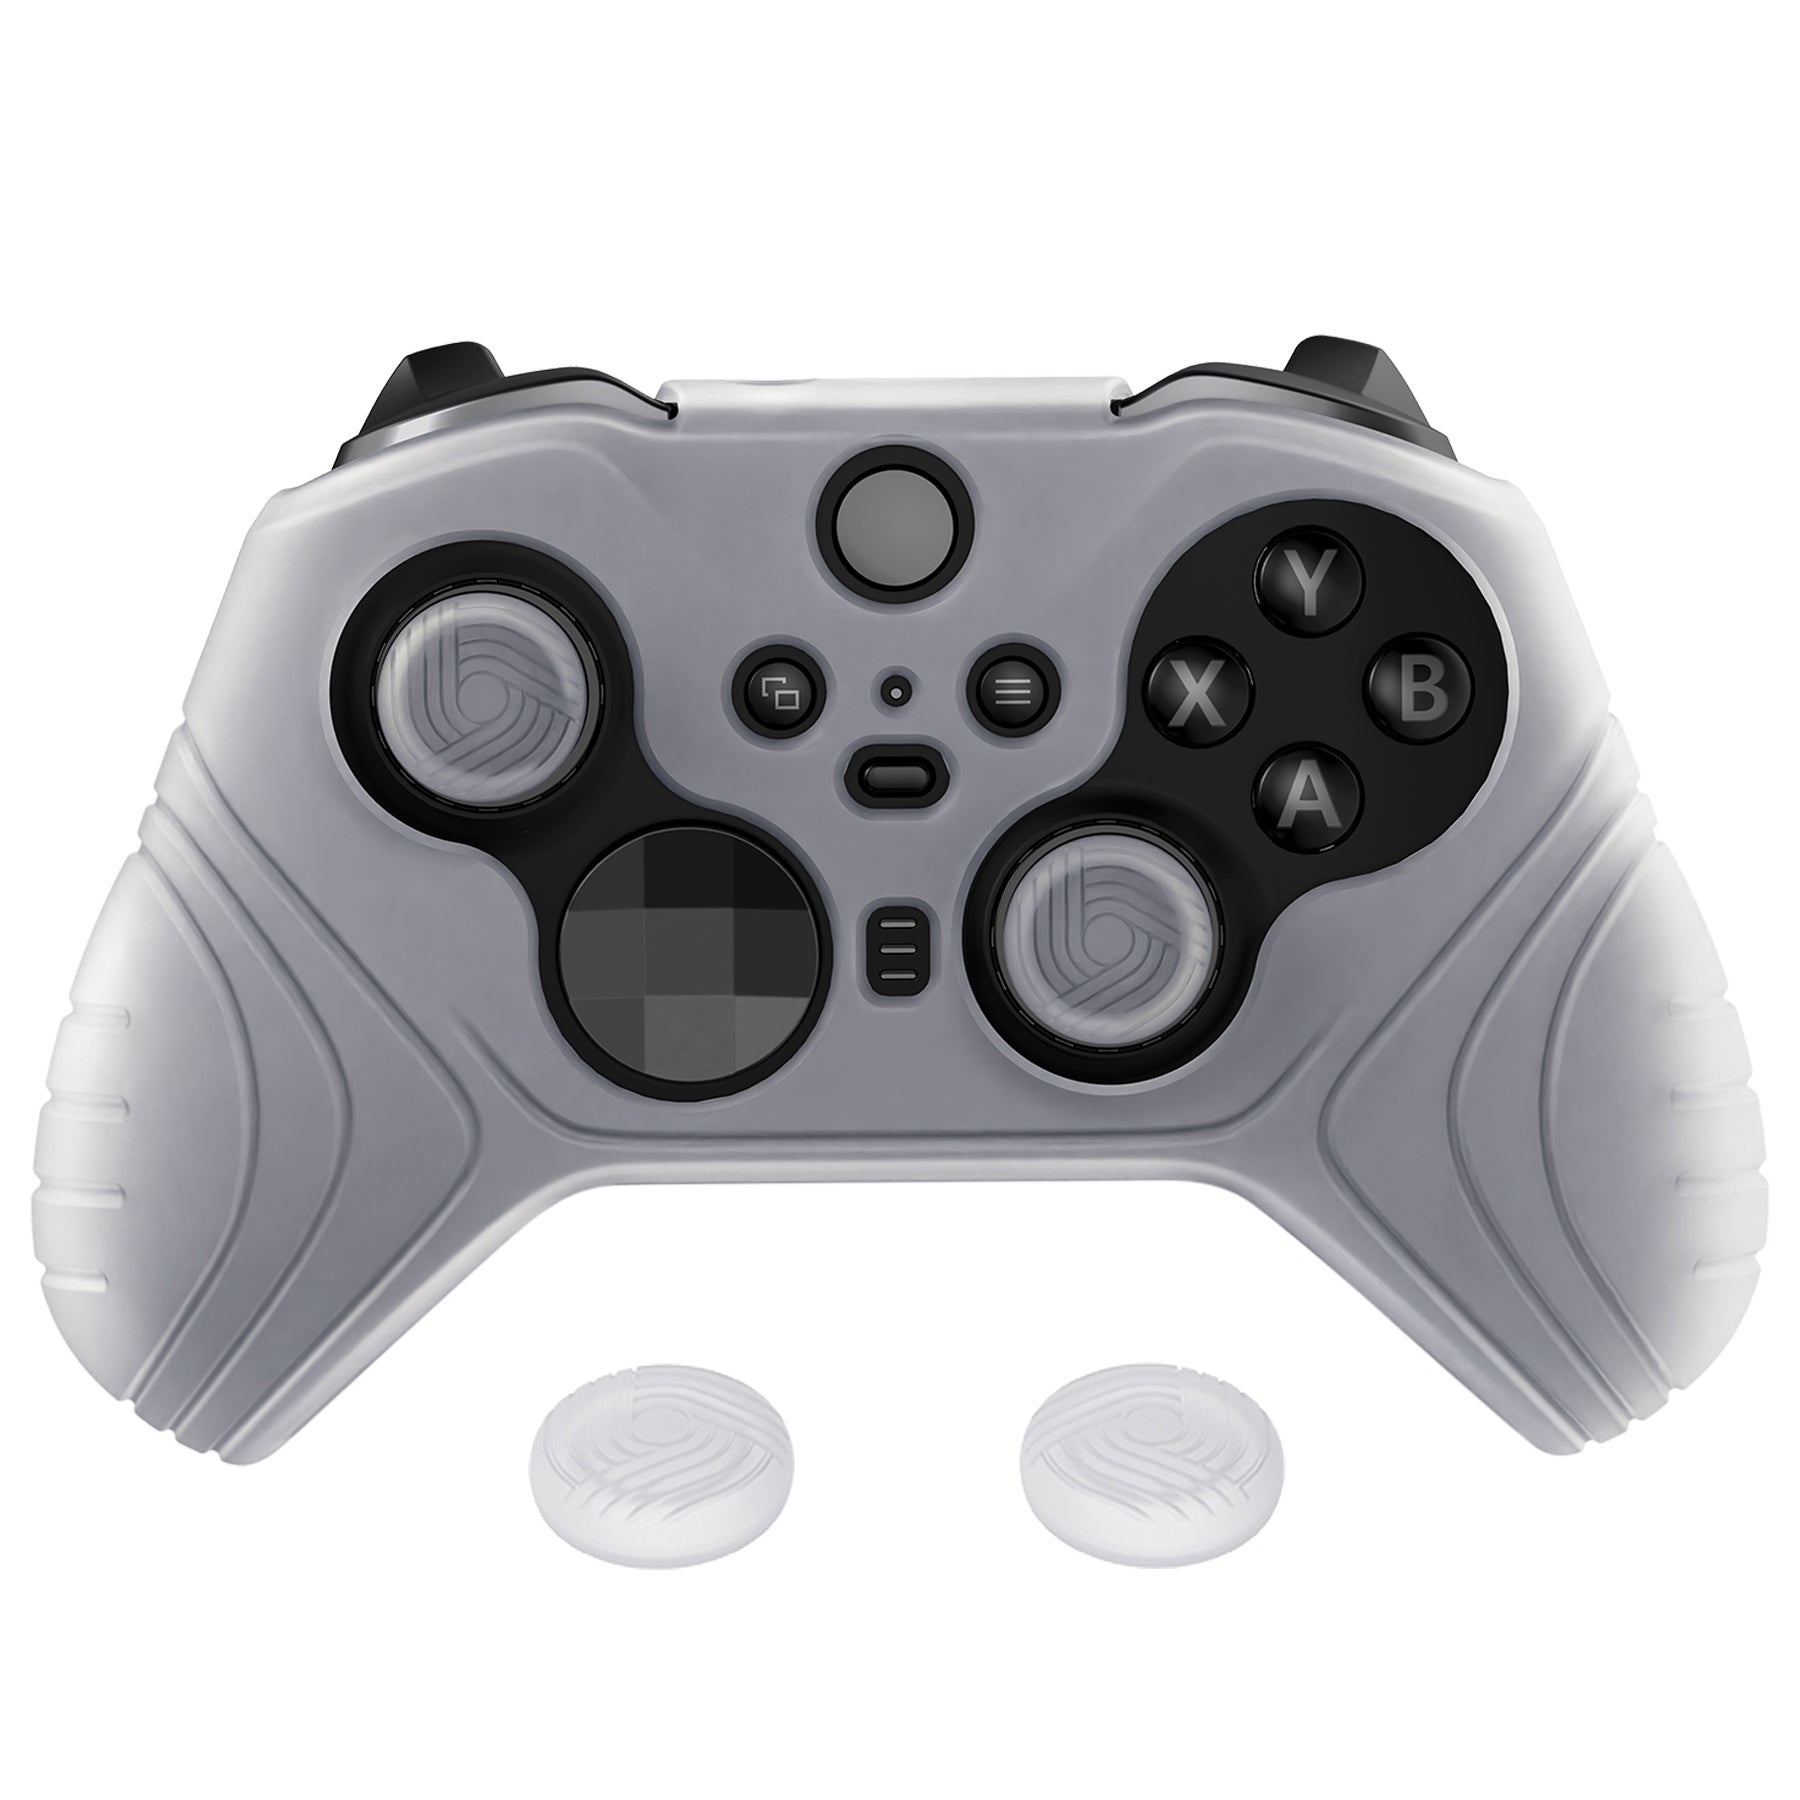 PlayVital Samurai Edition Anti Slip Silicone Case Cover for Xbox Elite Wireless Controller Series 2, Ergonomic Soft Rubber Skin Protector for Xbox Elite Series 2 with Thumb Grip Caps - Clear White- XBE2M003 playvital